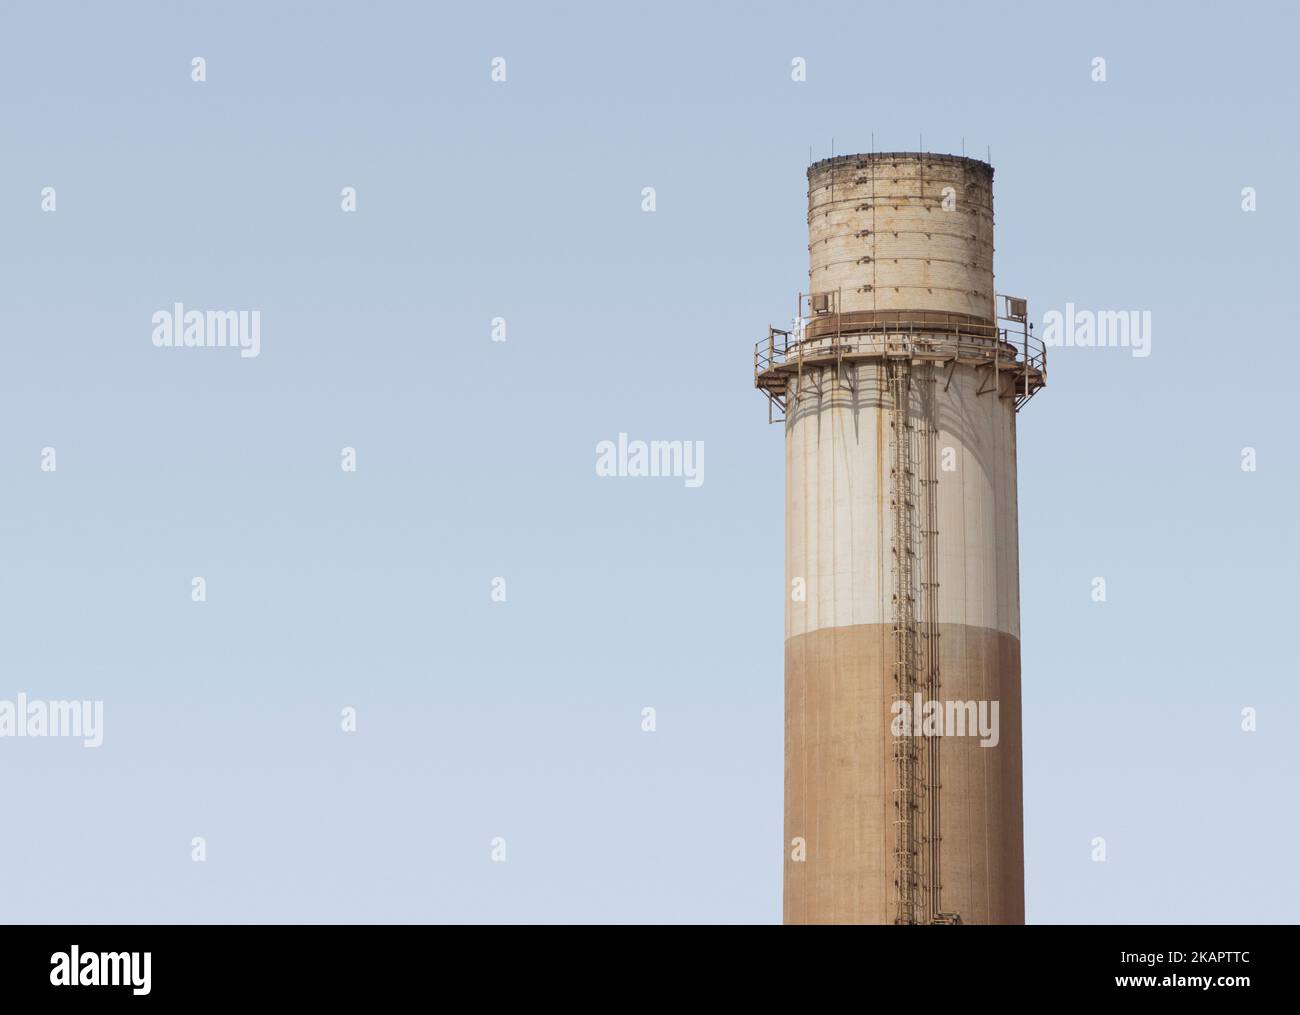 Top section of an industrial chimney on the banks of the river Nile, Egypt Stock Photo